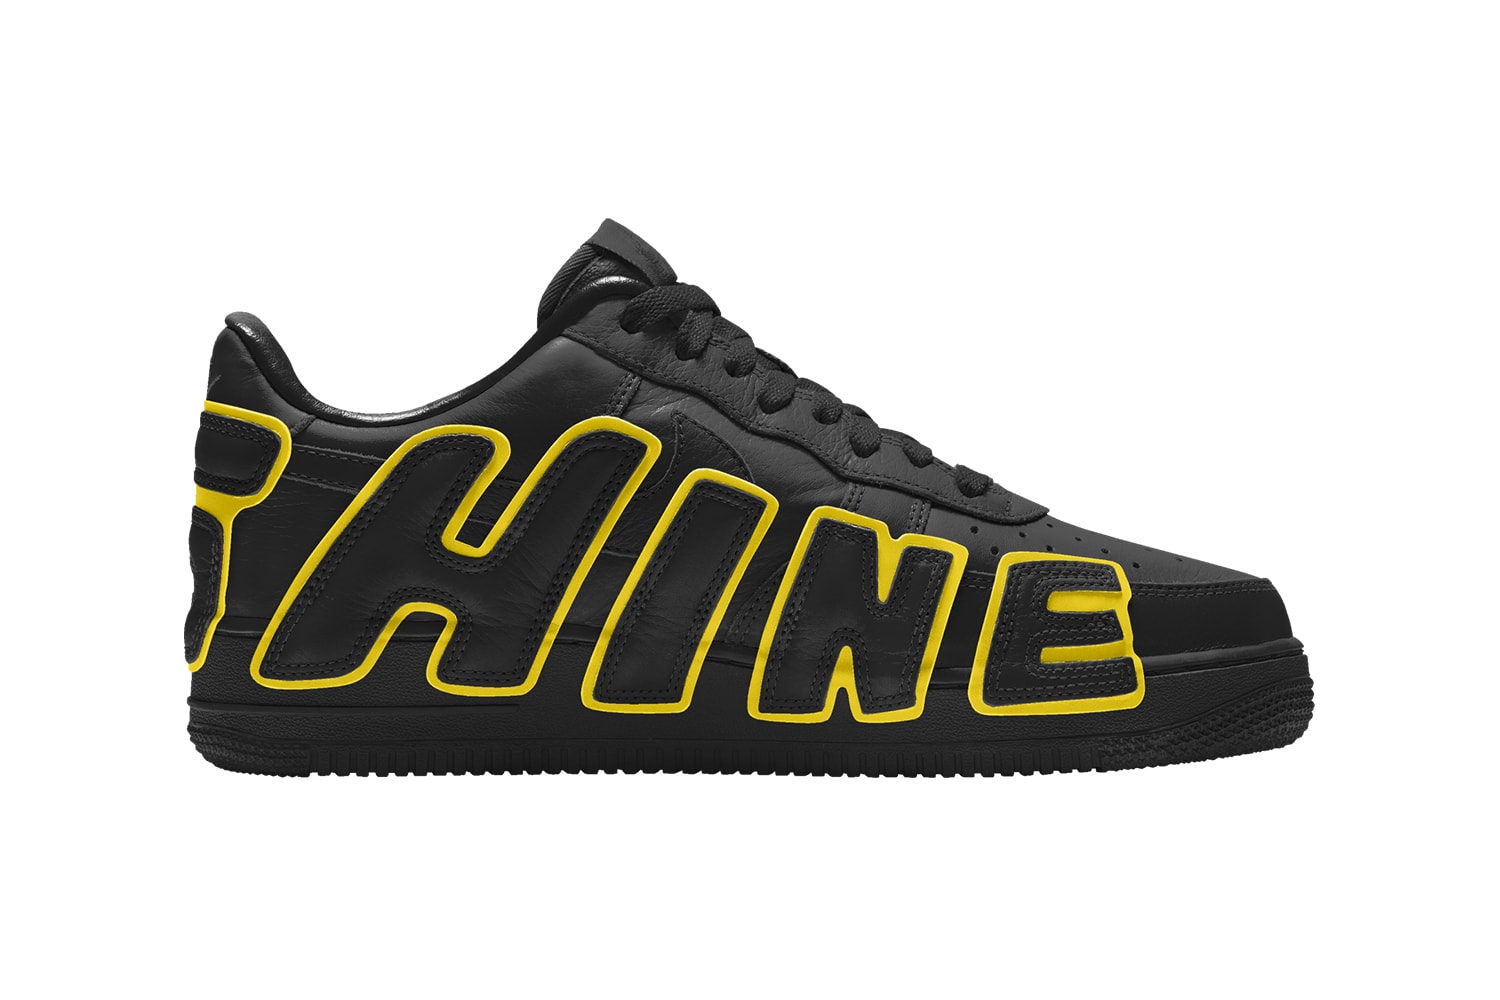 CPFM x ナイキ エアフォース1 カクタスプラントフリーマーケット Cactus Plant Flea Market Nike Air Force 1 By You Official Look Black White Yellow Red Release Info Date Buy Capsule 